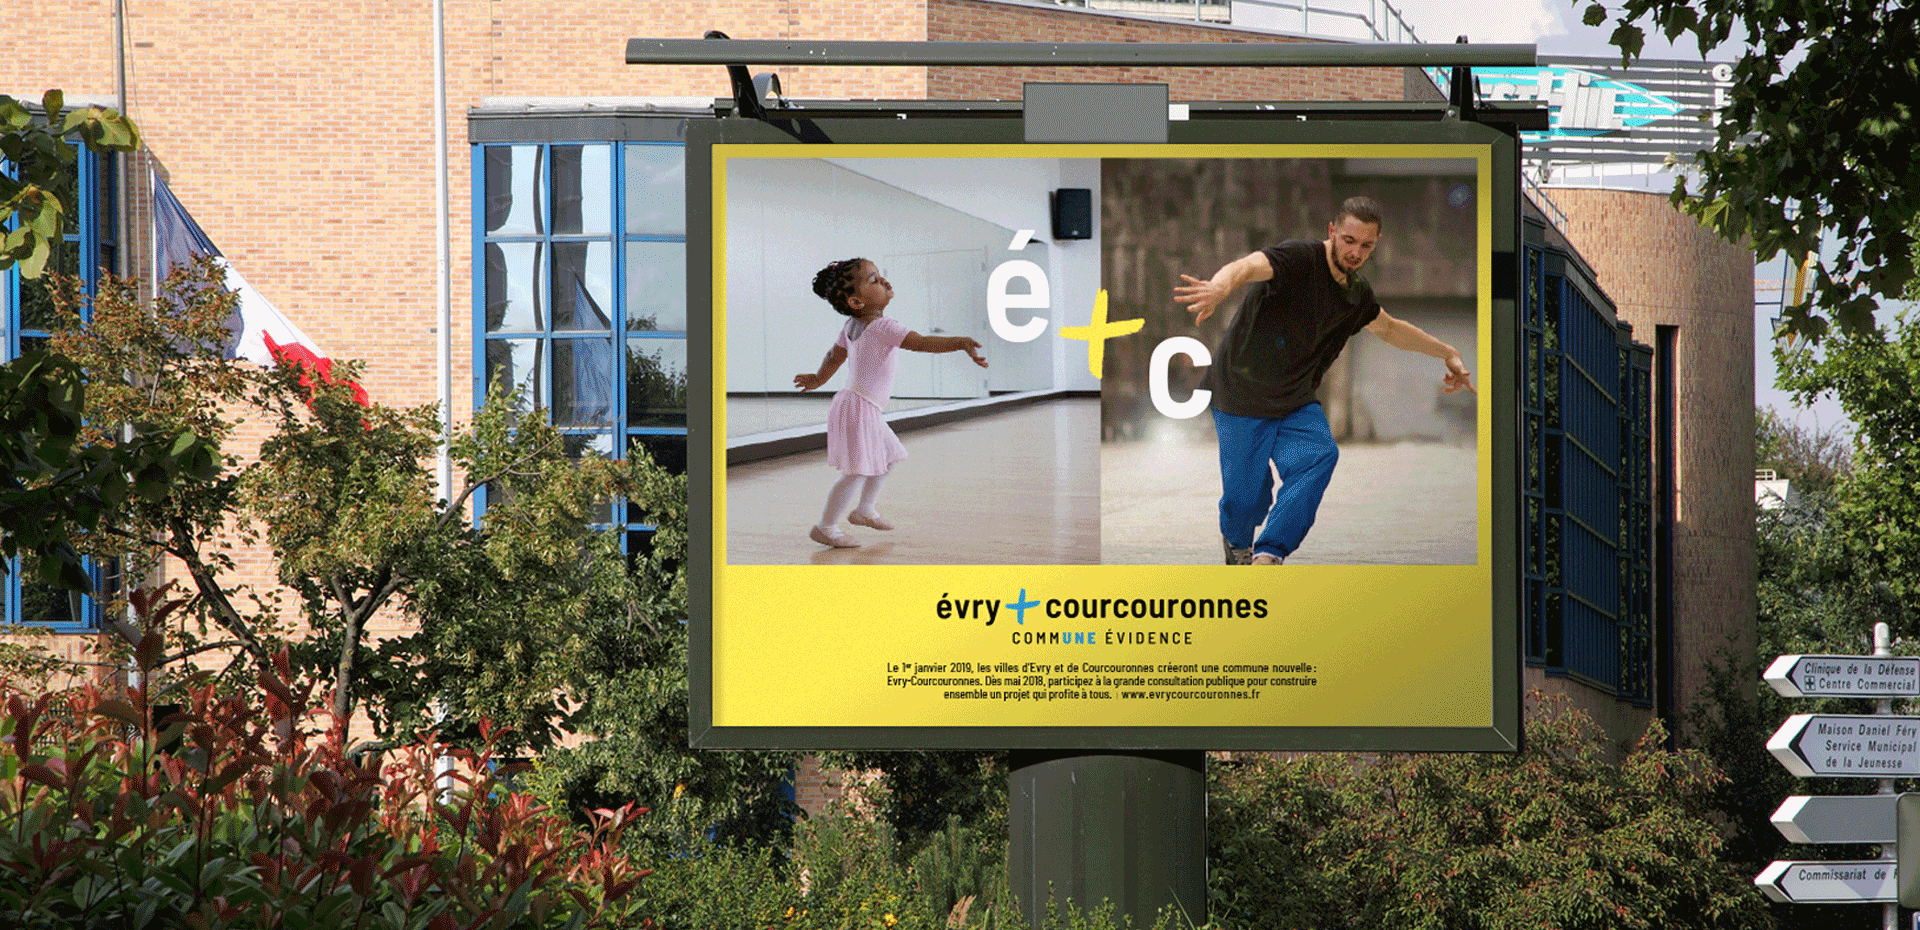 Evry courcouronnes commune evidence campagne